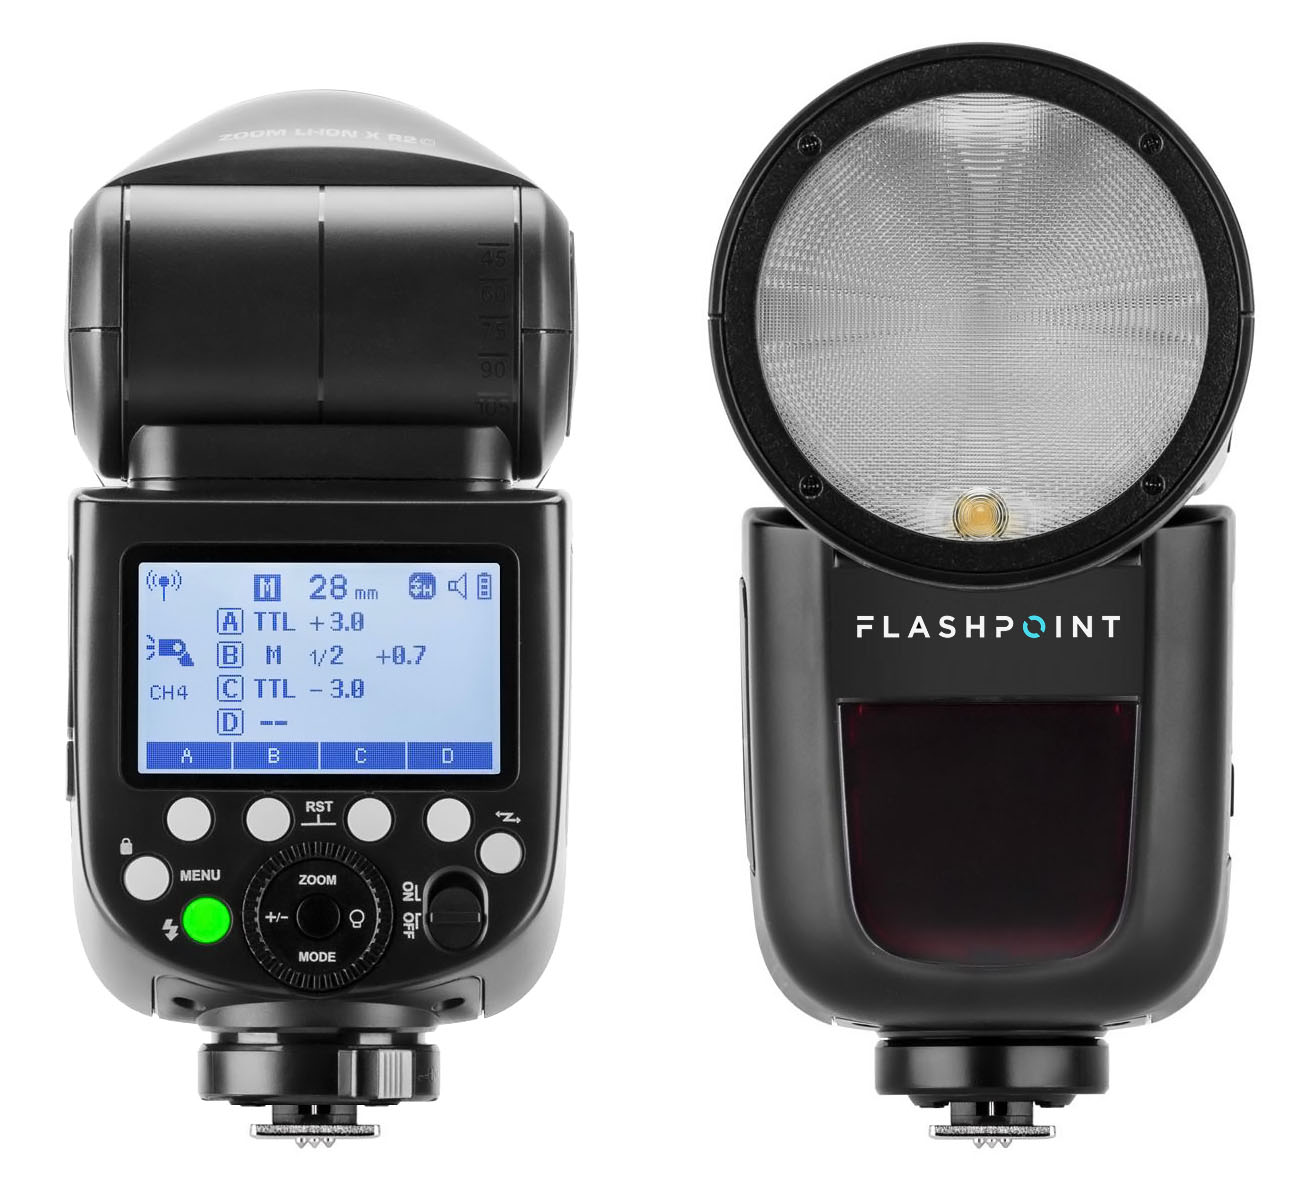 Godox to release an updated V1 Pro round head speedlight with built-in  cooling fan